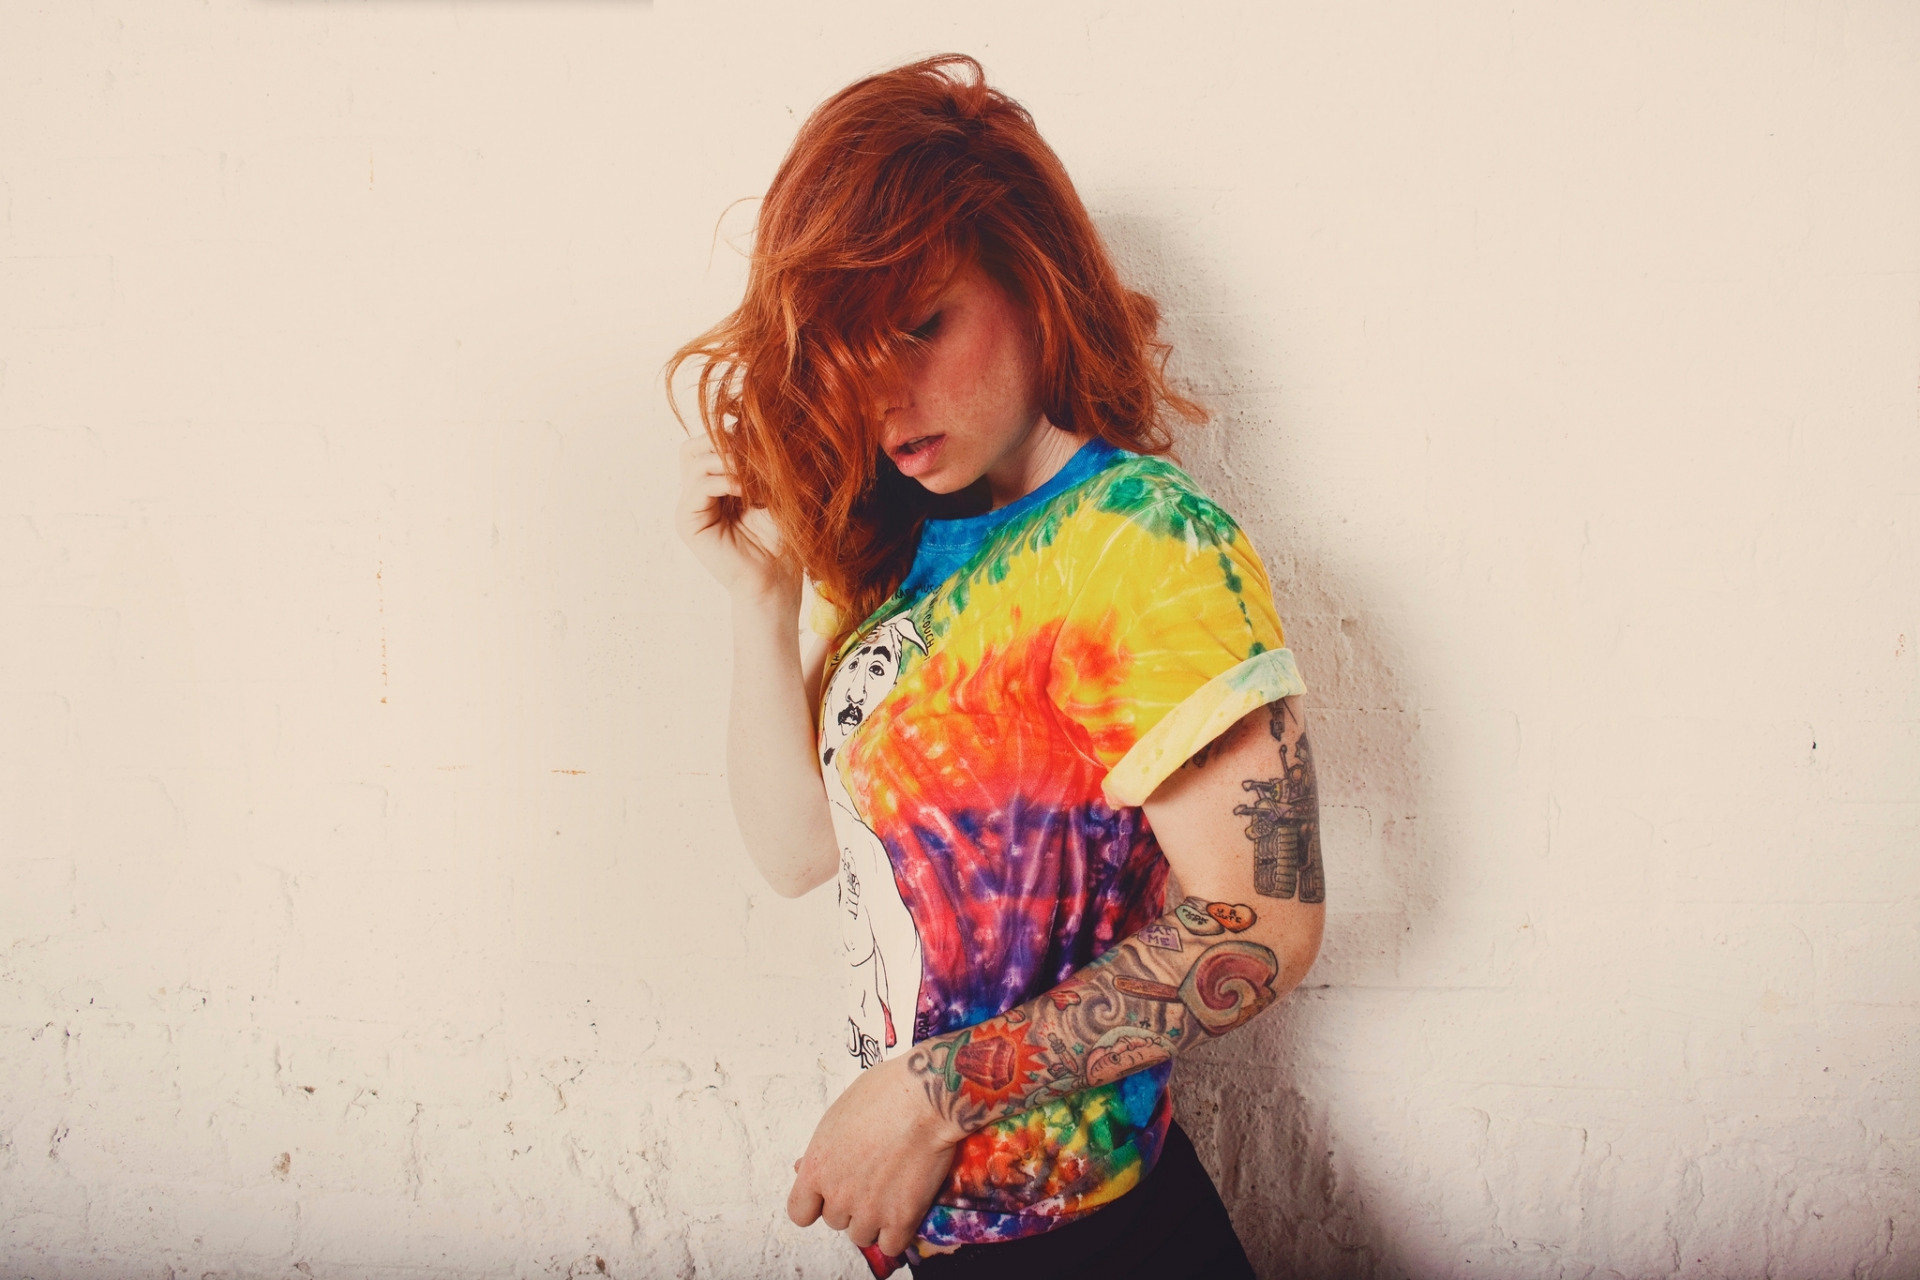 Model Tattoo Sleeve Open Mouth Touching Hair T Shirt Tattoo Simple Background Redhead Women Messy Ha 1920x1280